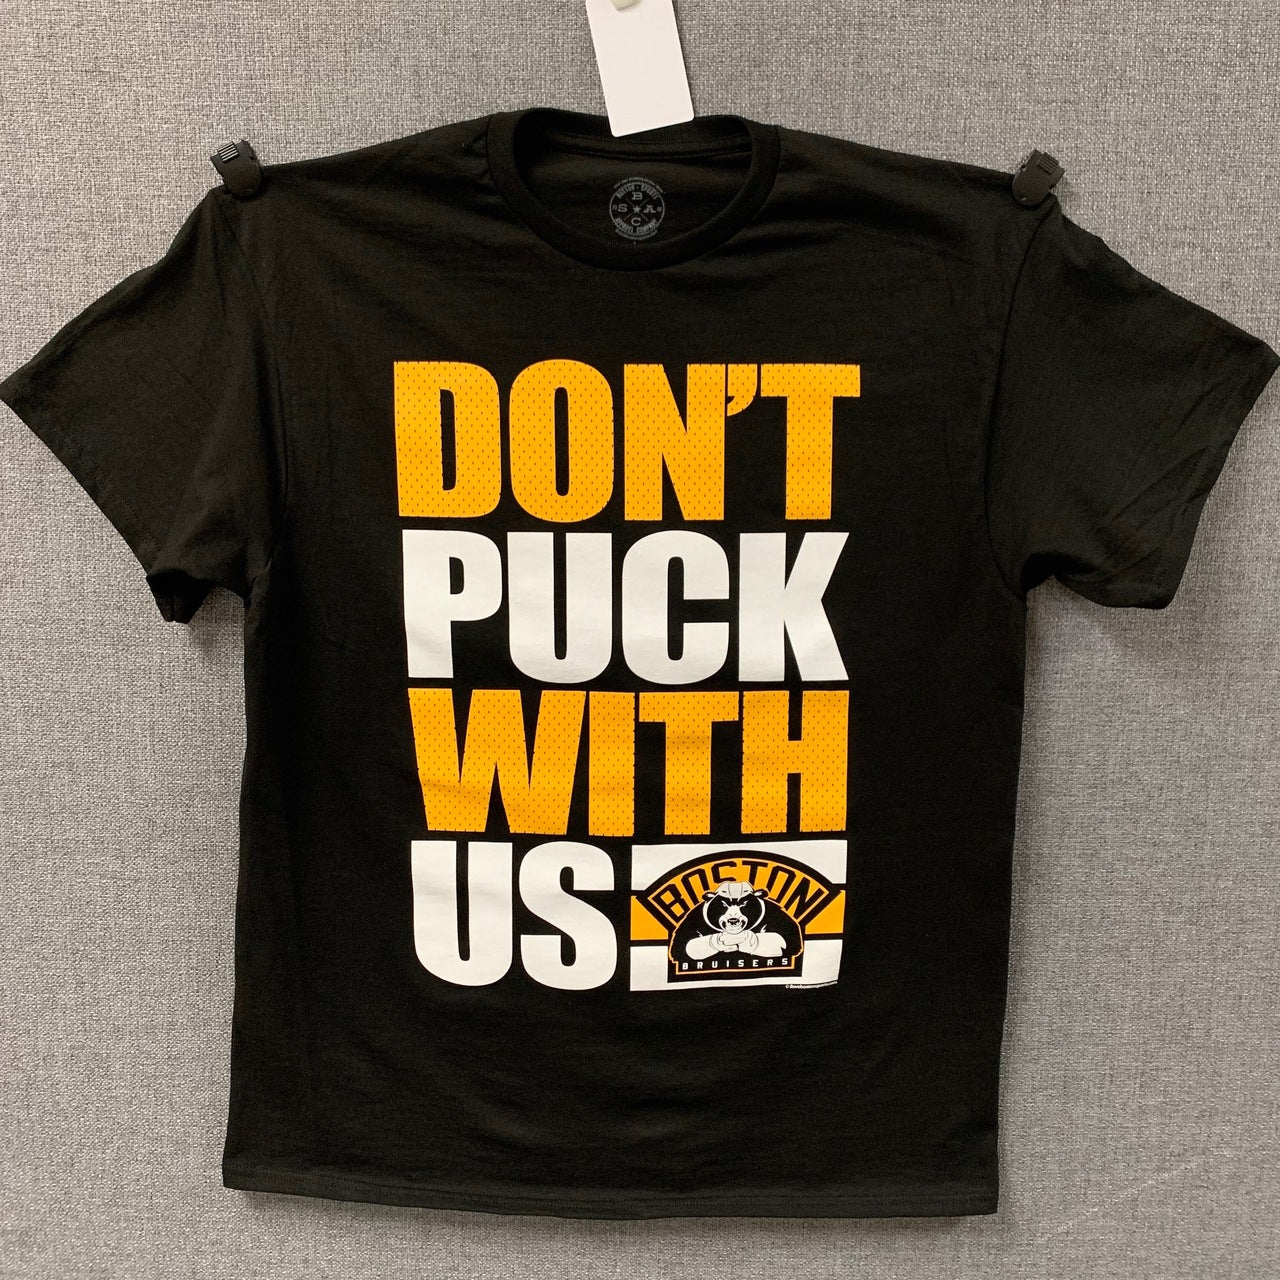 Don't Puck Wit' Us!